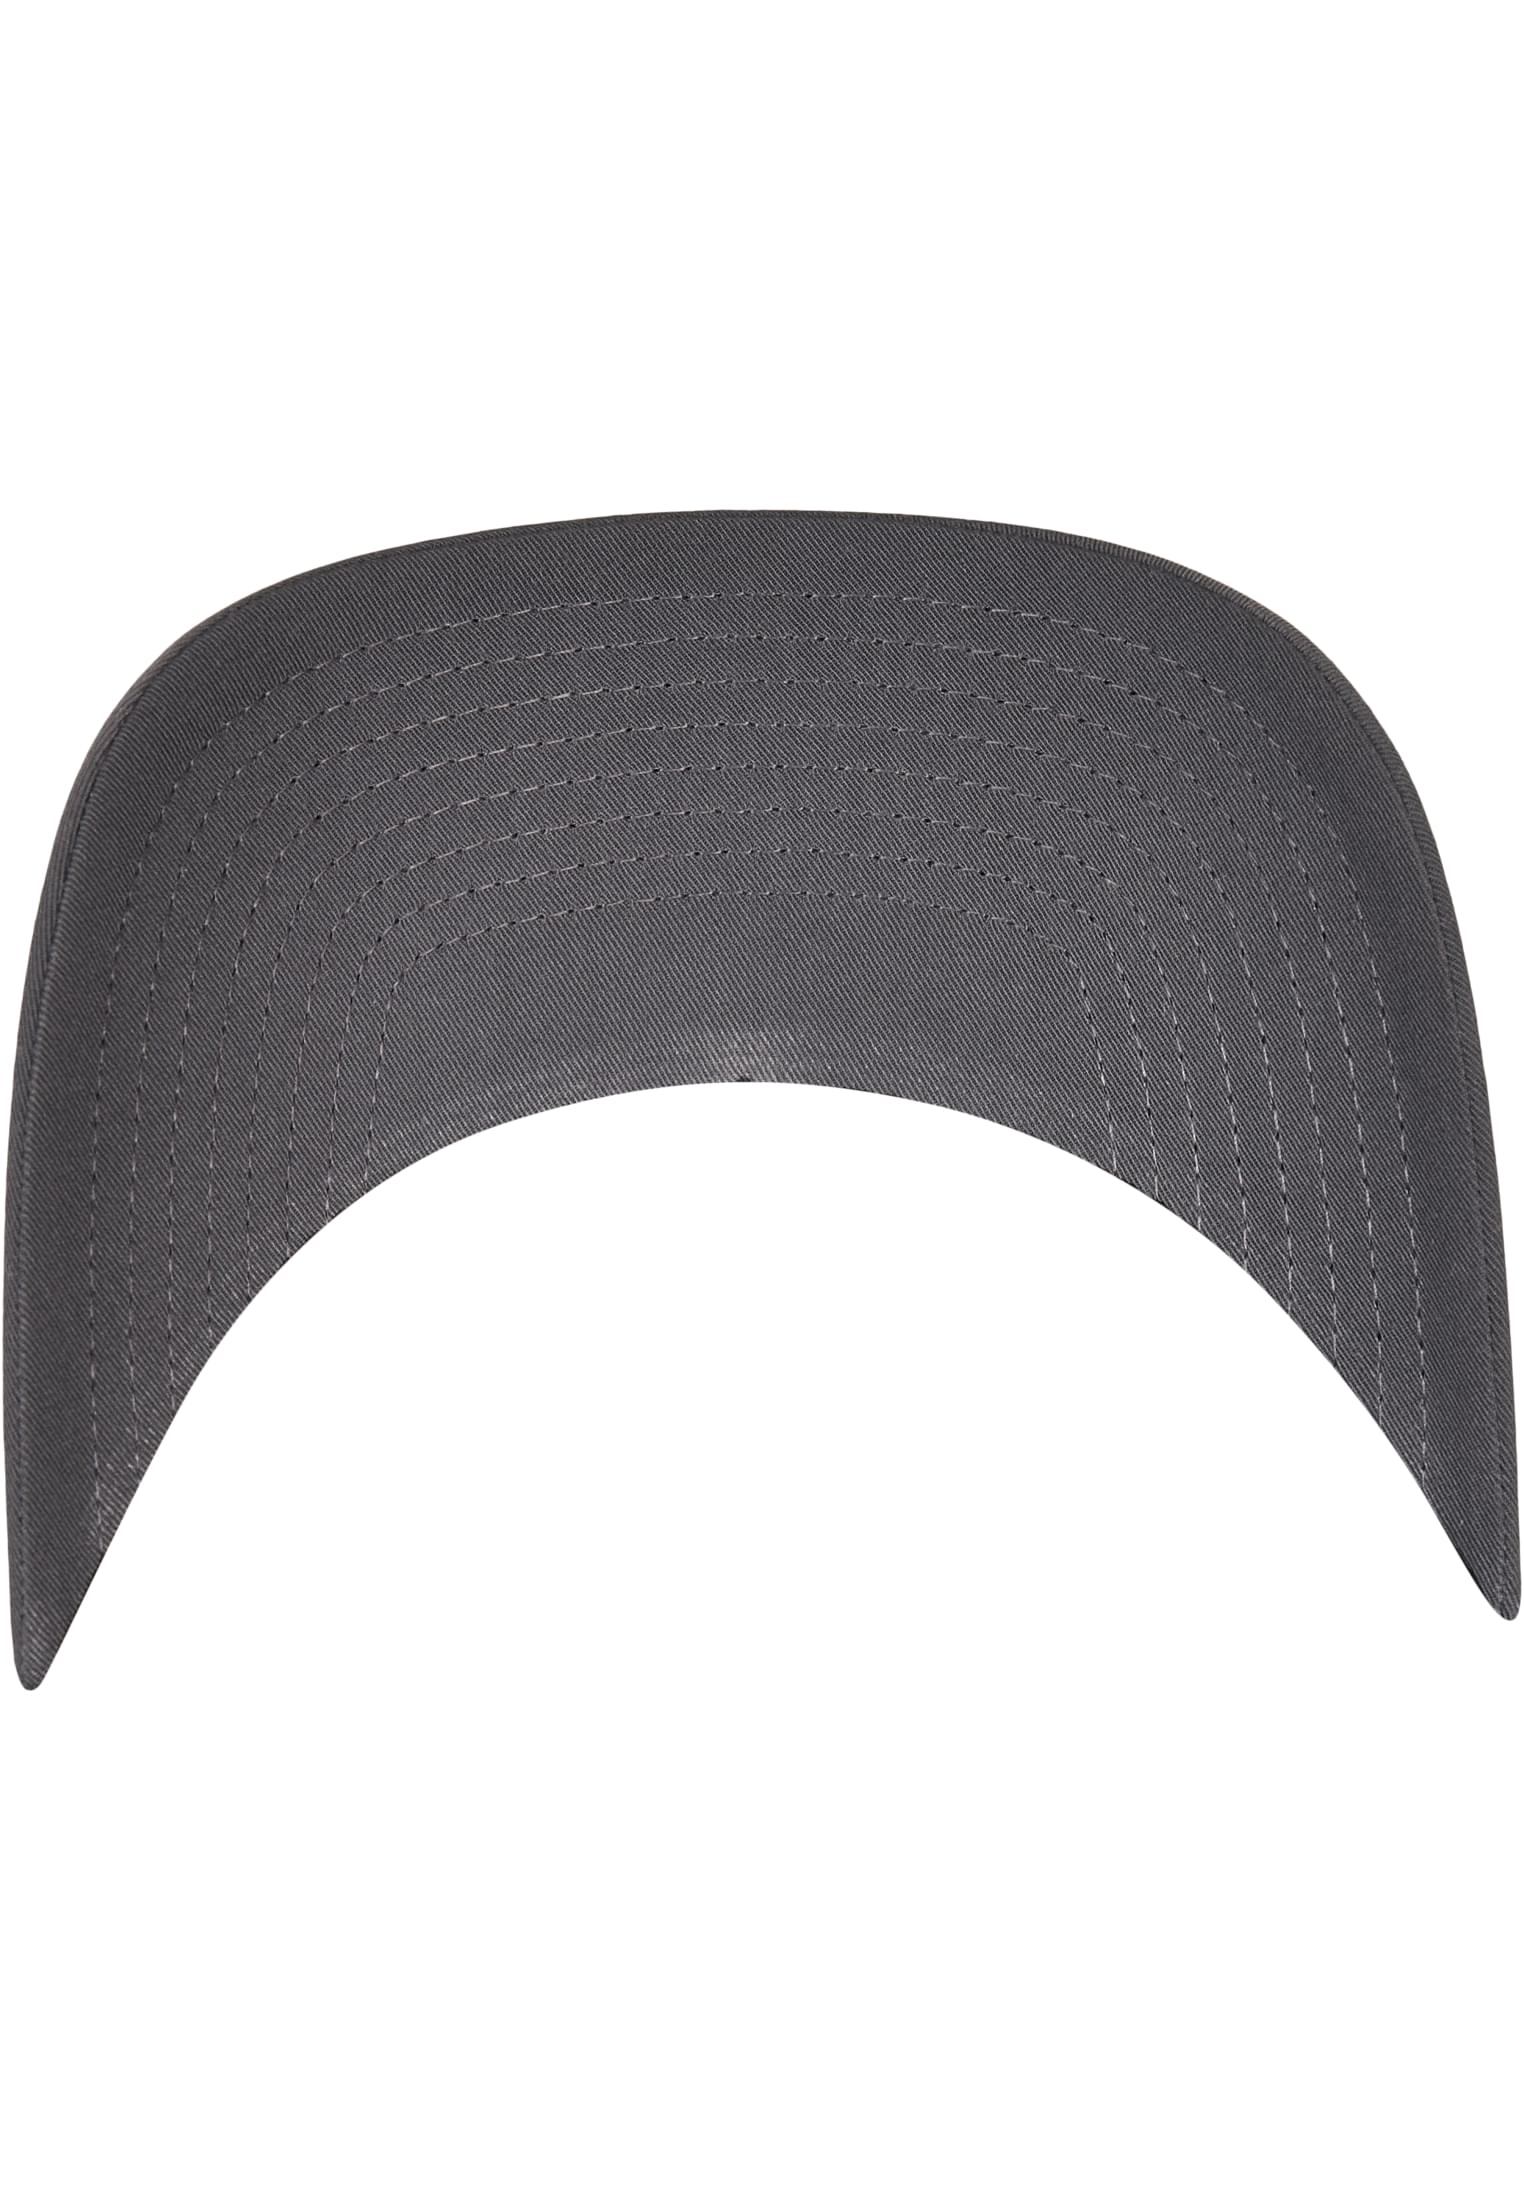 Cap-6277RP Flexfit Polyester Recycled